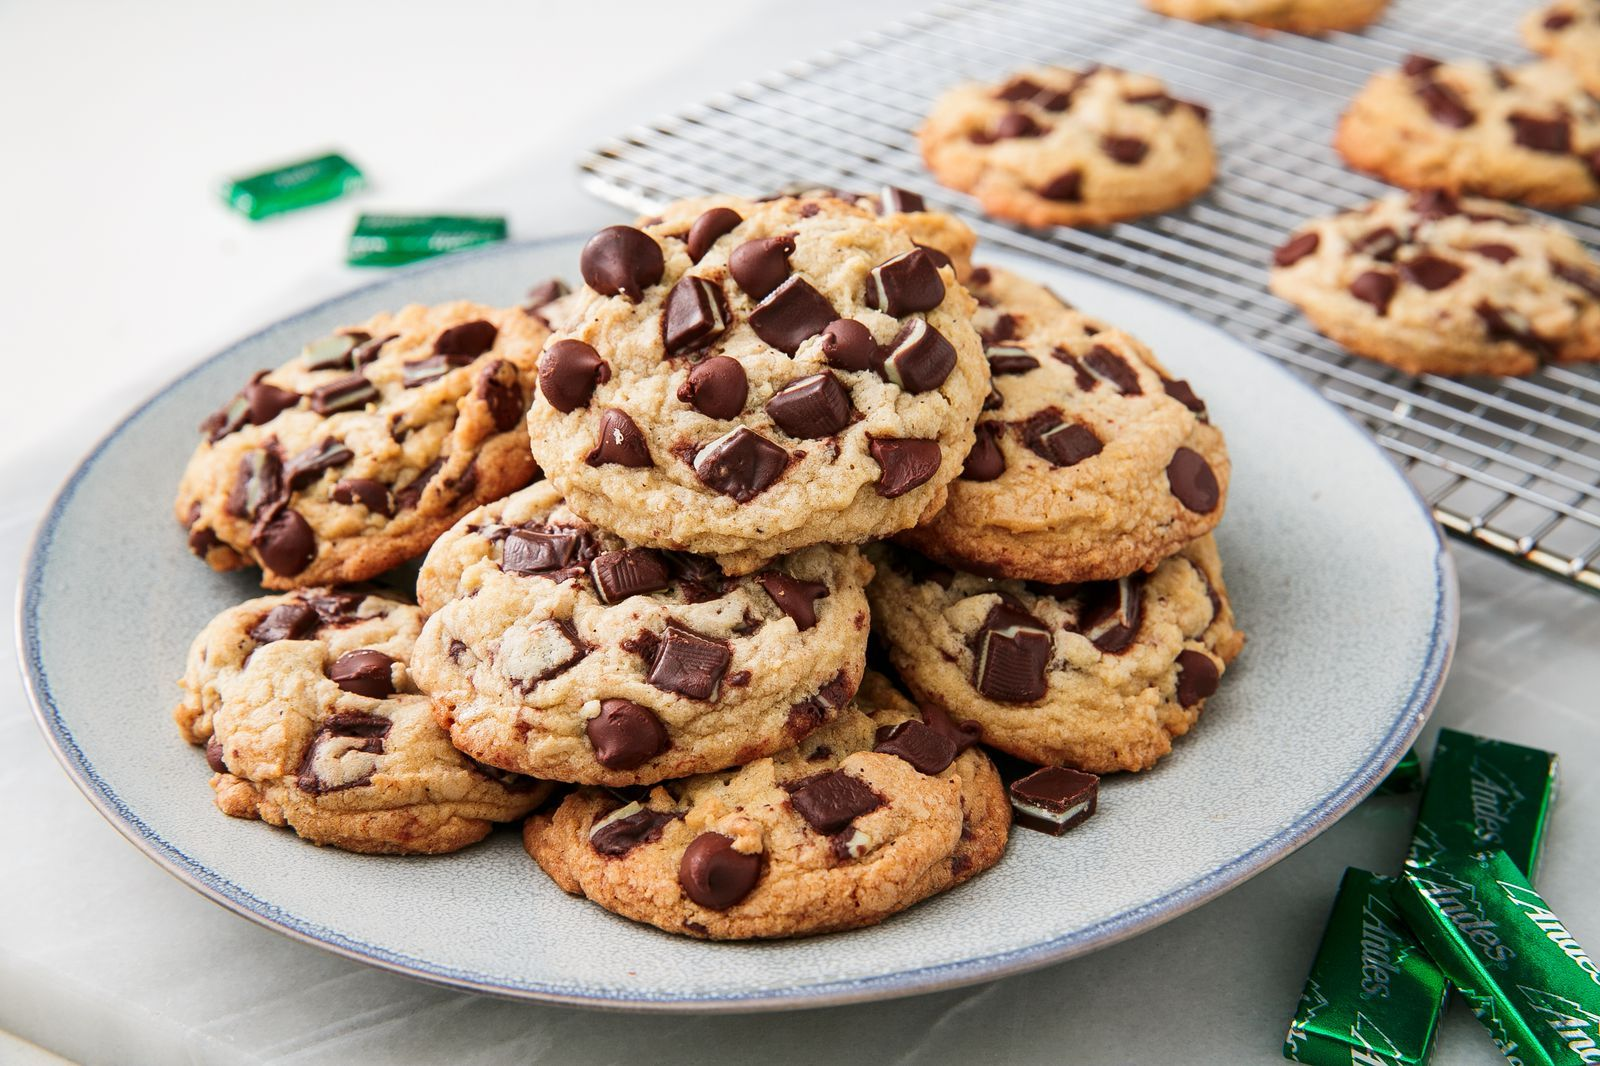 How to Make the Best Chocolate Chip?